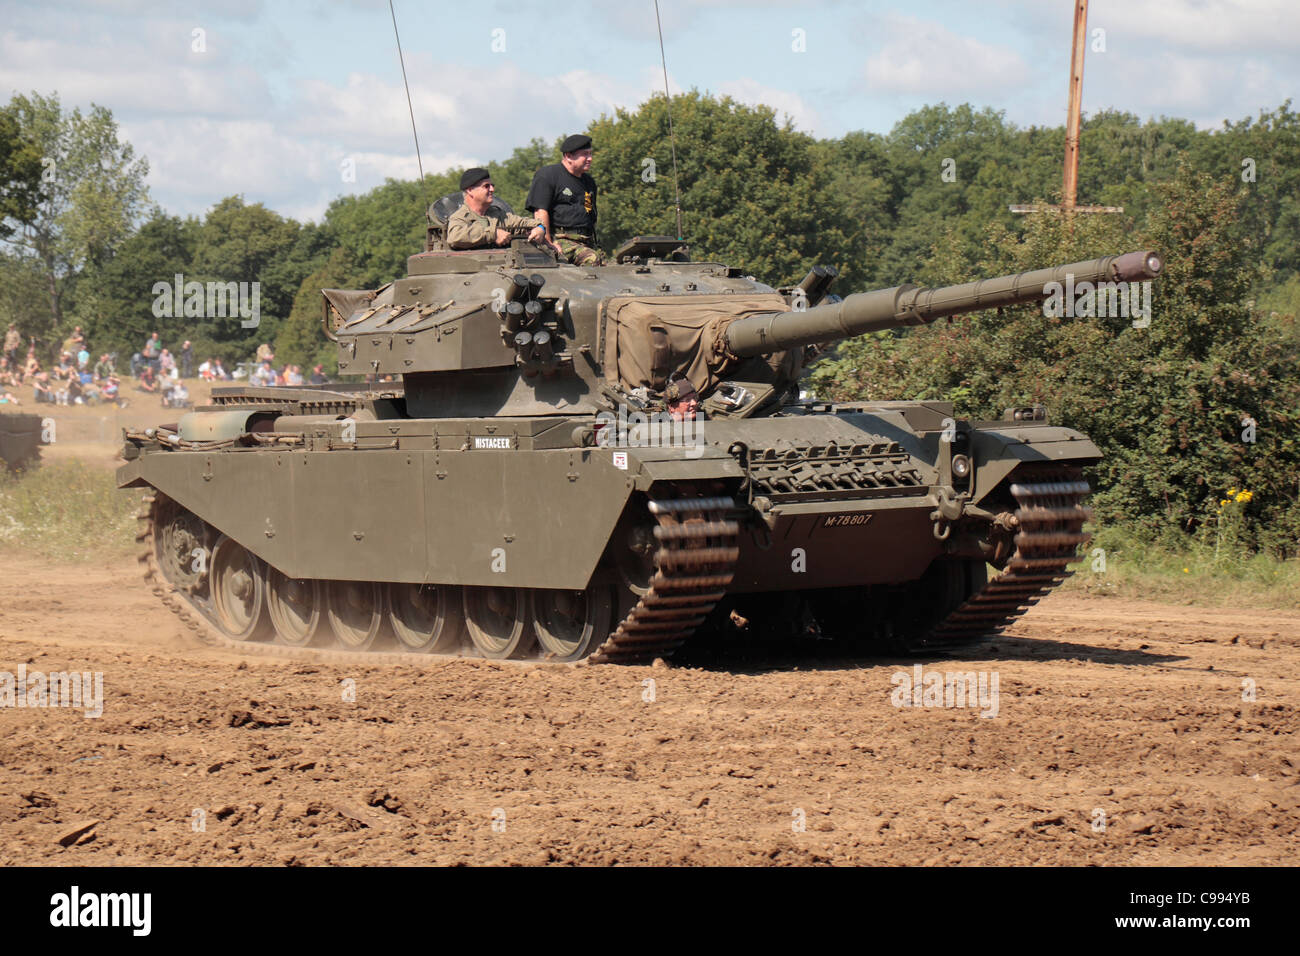 British Centurion Tank High Resolution Stock Photography and Images - Alamy